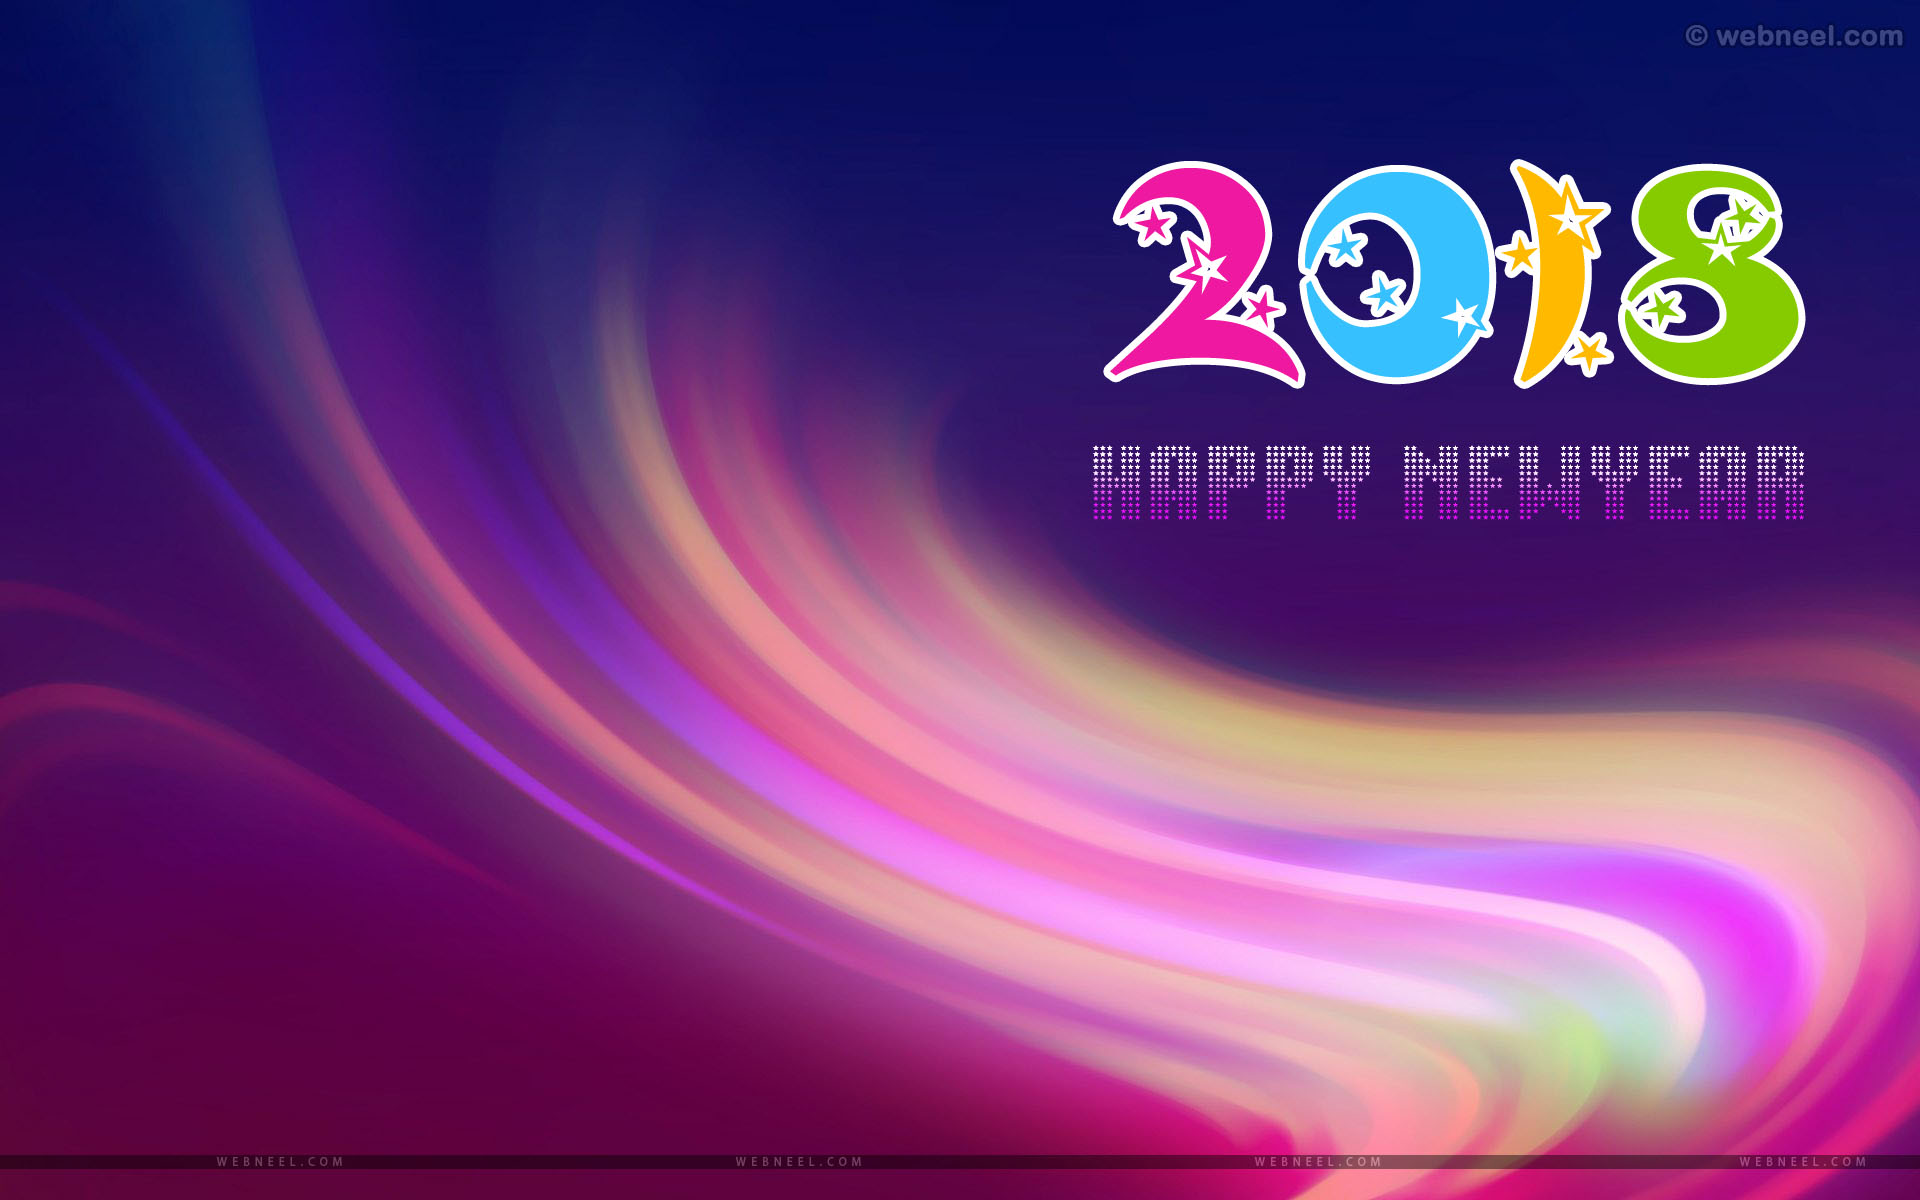 New Year, 2018 Wallpaper, Hd New Years Wallpapers, Happy New Year Wallpapers, Happy New Year 